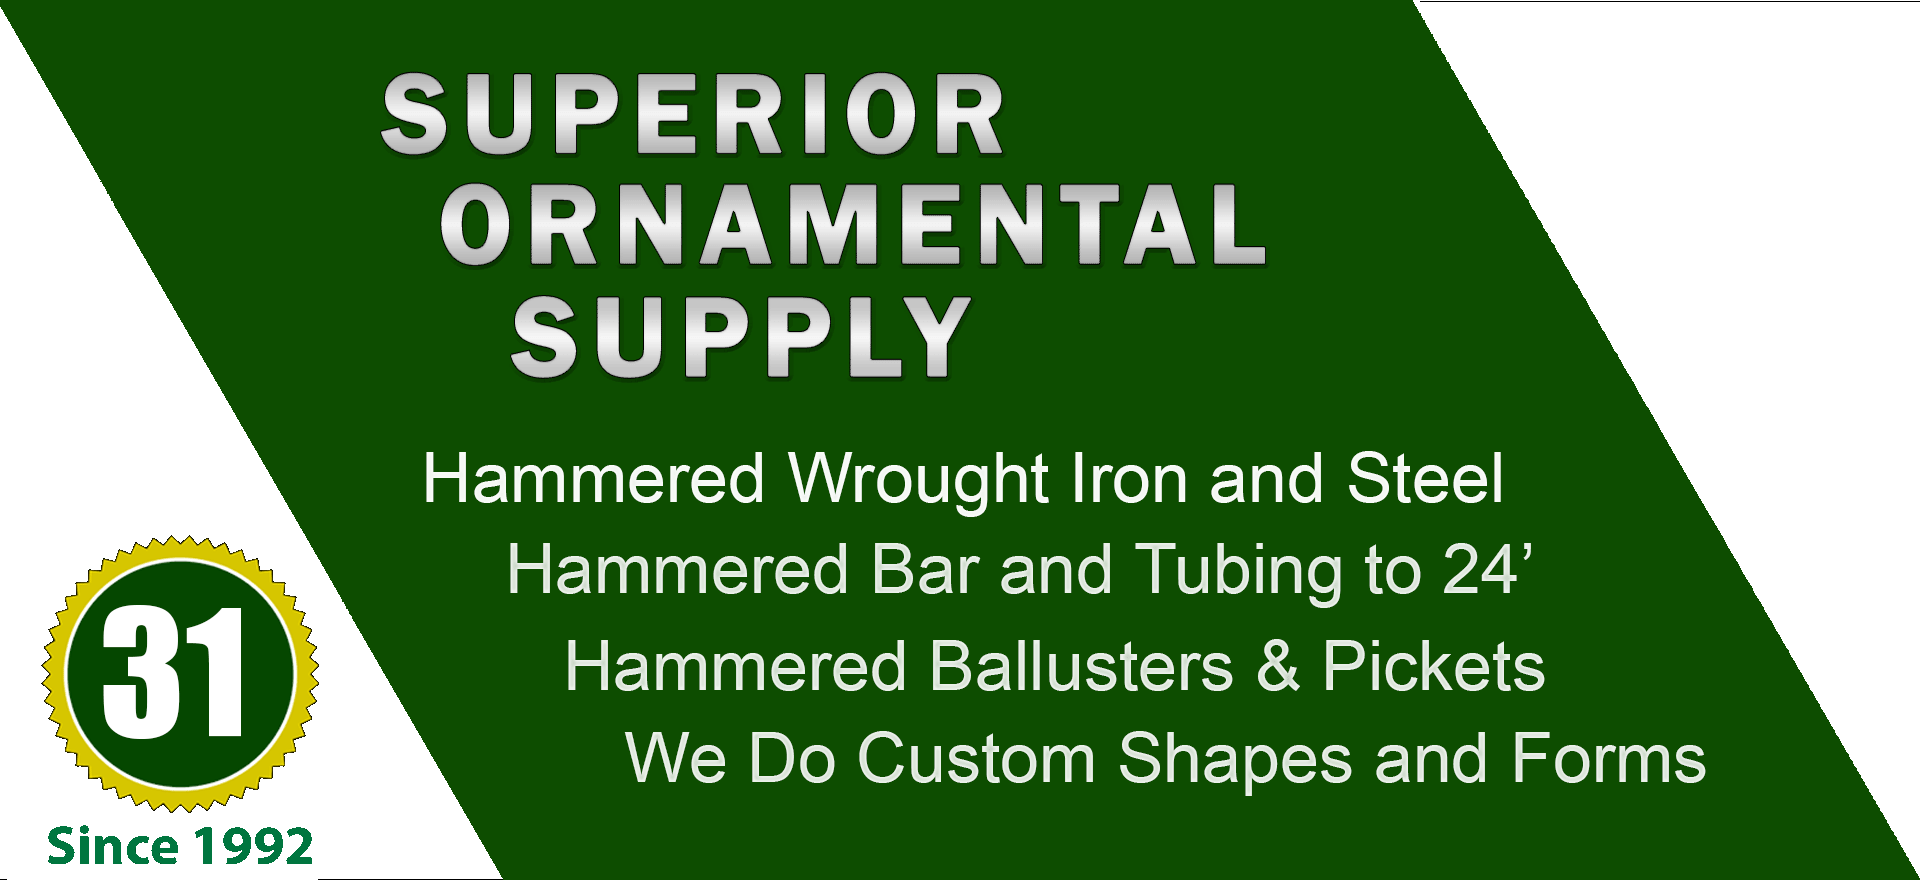 Hammered Bar and Tubing. Flat Bar, Round Solid, Square Solid, Rectangular Tube, Square Tube, Hot Forged Embossed Bar Stock. Wide variety and Excellent Quality from Superior Ornamental Supply.